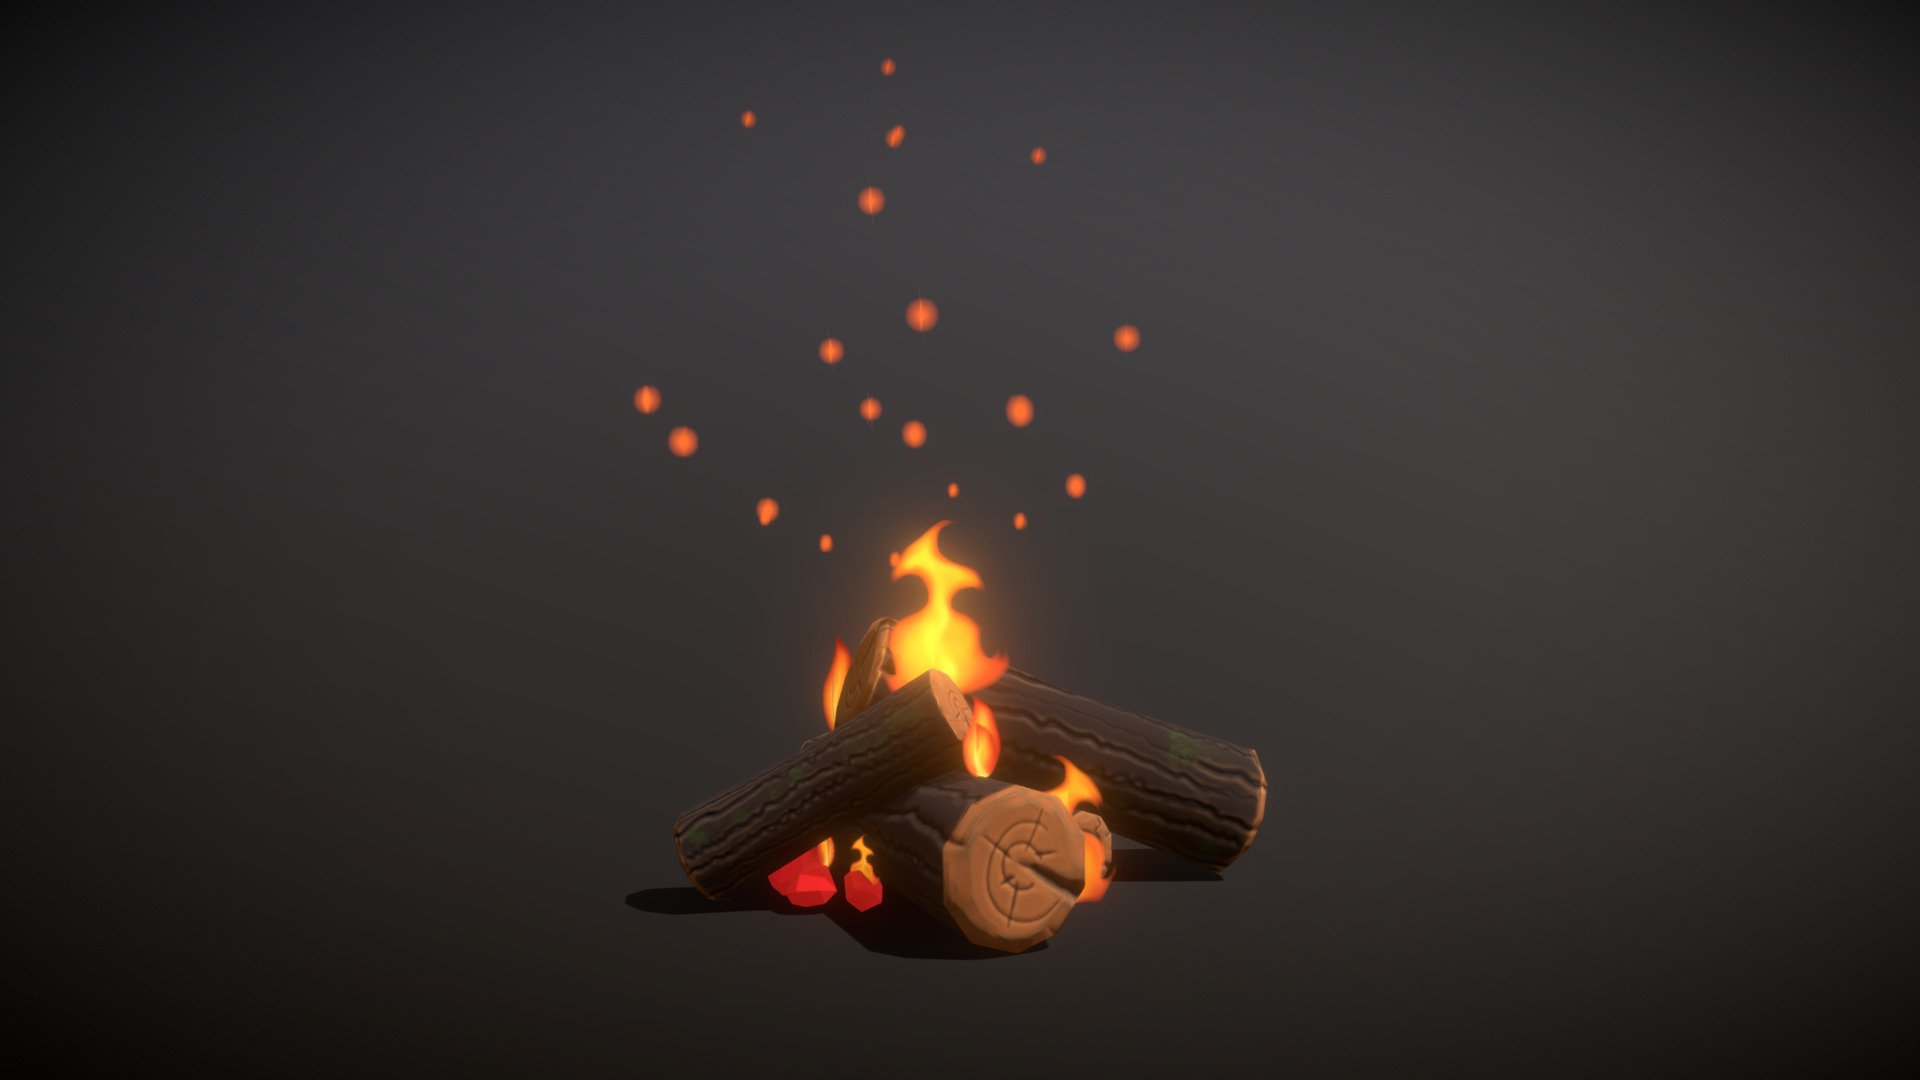 Game ready lowpoly asset: fire with logs, sparks and coal. Fantasy stylized bonfire ready for AR VR.


Asset comes with 2k PNG PBR textures of Color, Roughness, Normal Map, Emission and Transparency. 


Made for #SketchfabWeeklyChallenge and  #3December2022Challenge - Low poly fire place with logs - Buy Royalty Free 3D model by Scritta 3d model